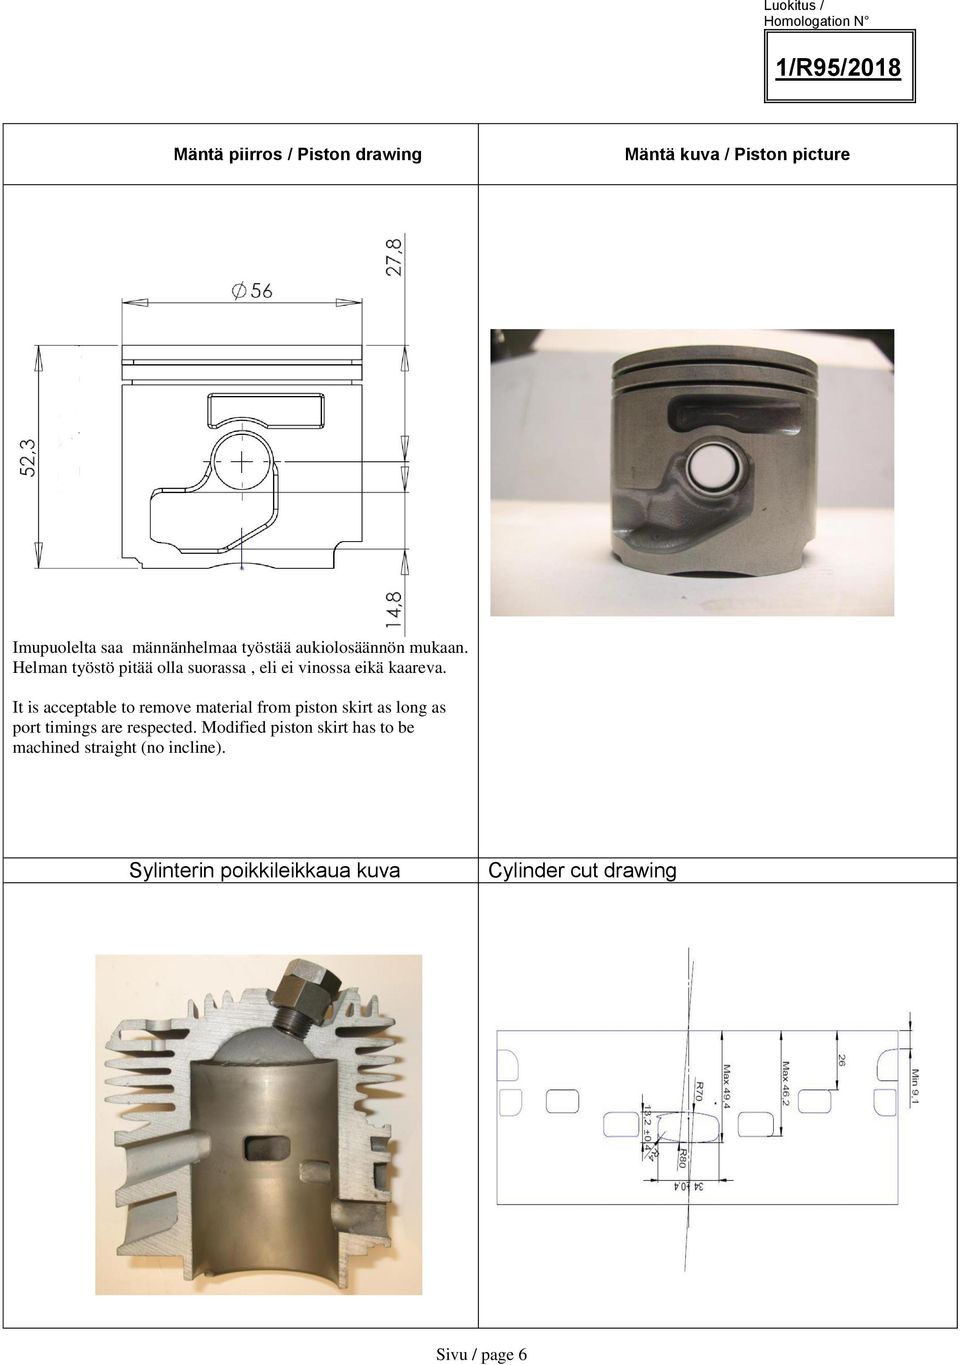 It is acceptable to remove material from piston skirt as long as port timings are respected.